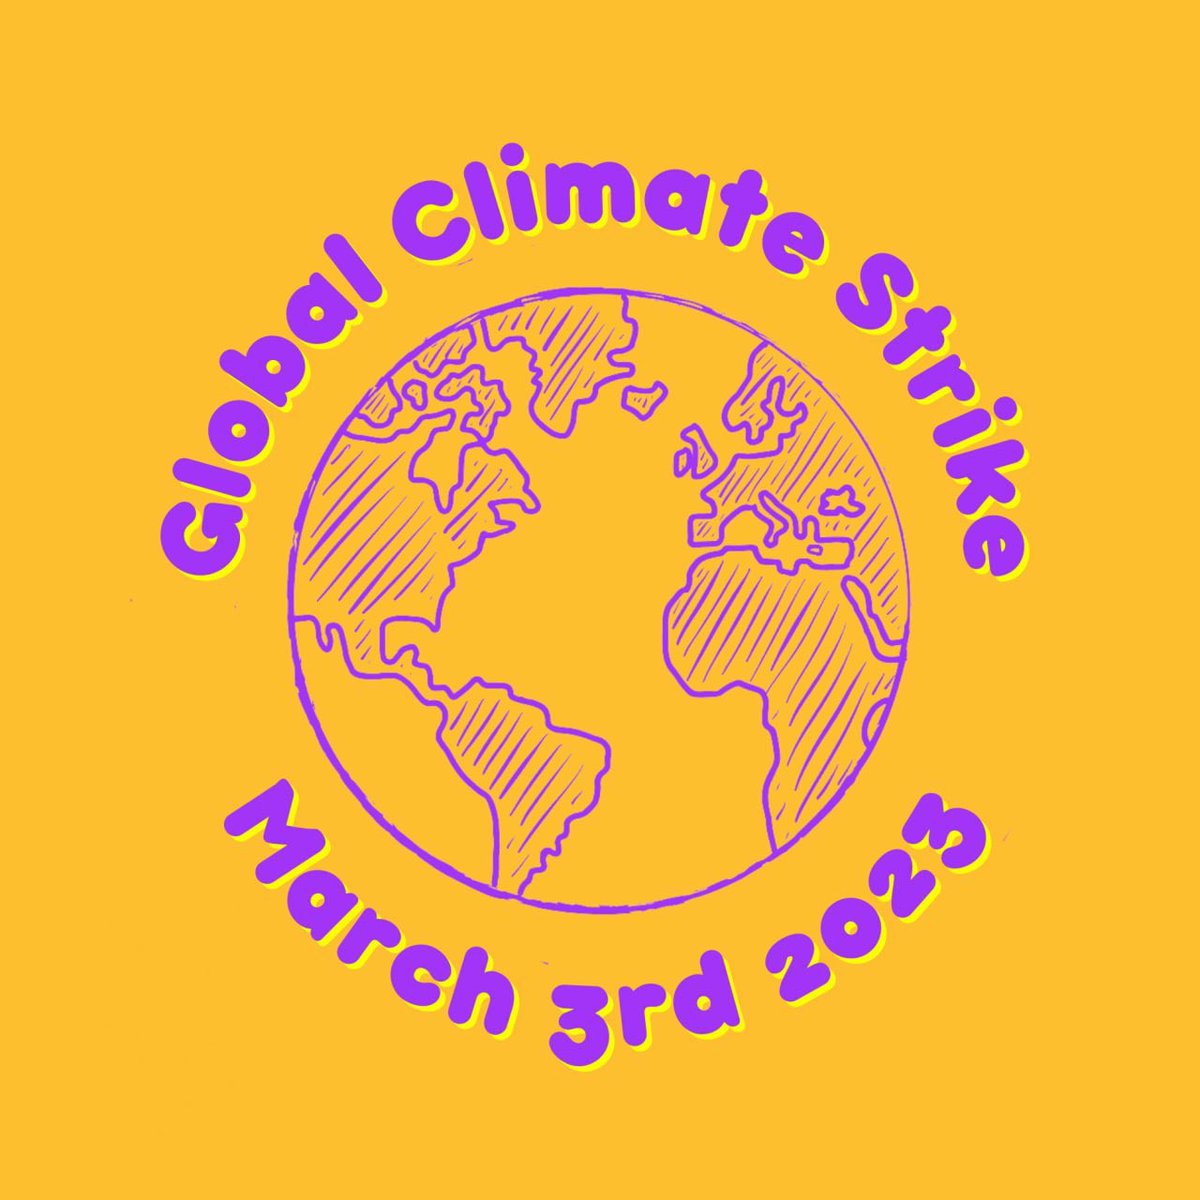 Wherever you are today, put down your tools, books📗, pens, step out from behind the 💻 and join your local #Fridays4Future 
Global Climate strike ✊🏿
#Brighton #London #Bristol #Sheffield #Glasgow 
#Berlin #Stockholm #Paris 
Let's #endfossilsfuels together🛢❌️🛢